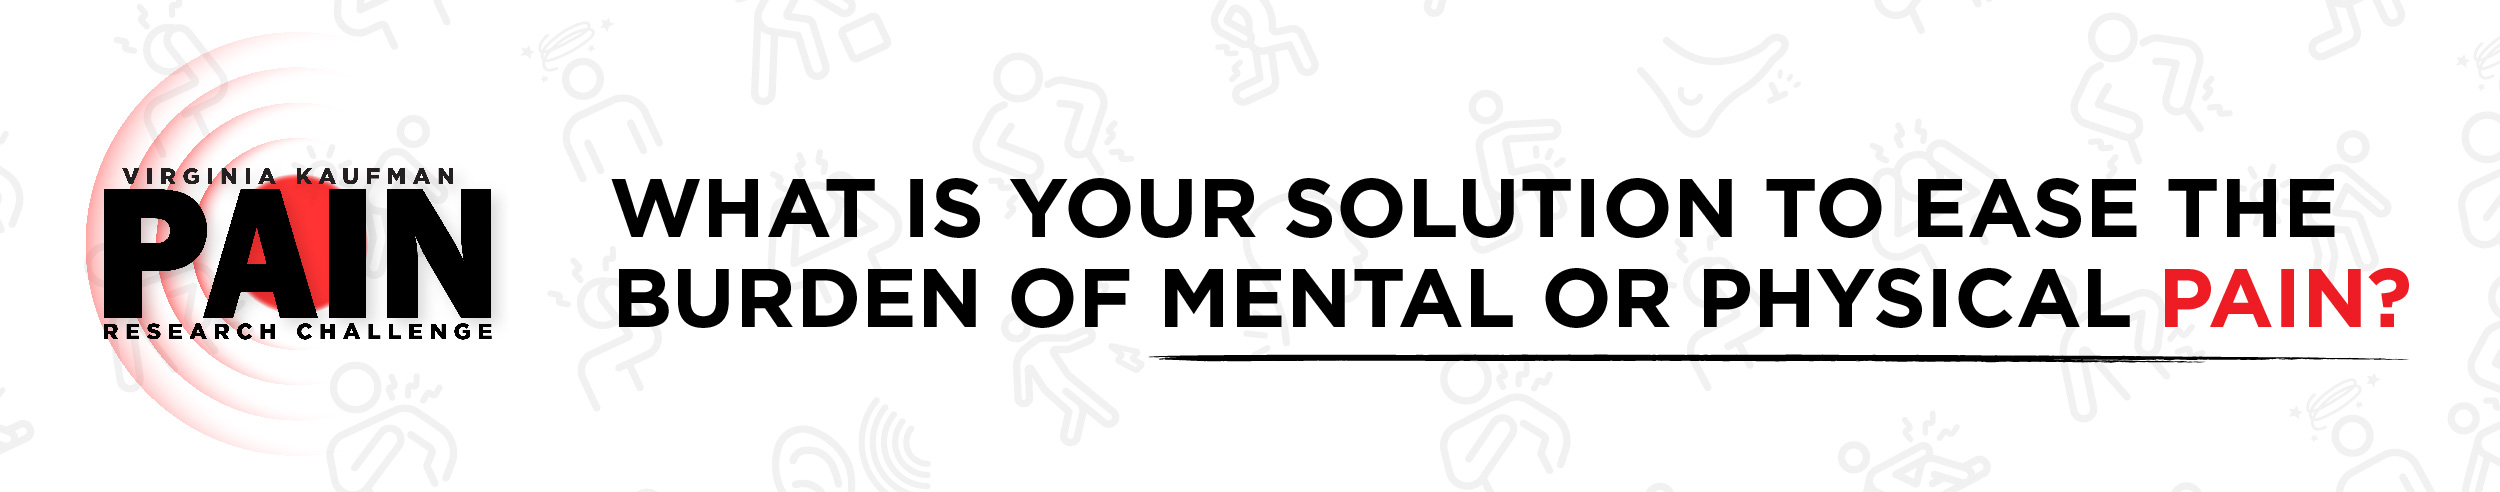 Pain Research Challenge Banner. What is your solution to ease the burden of mental or physical pain?